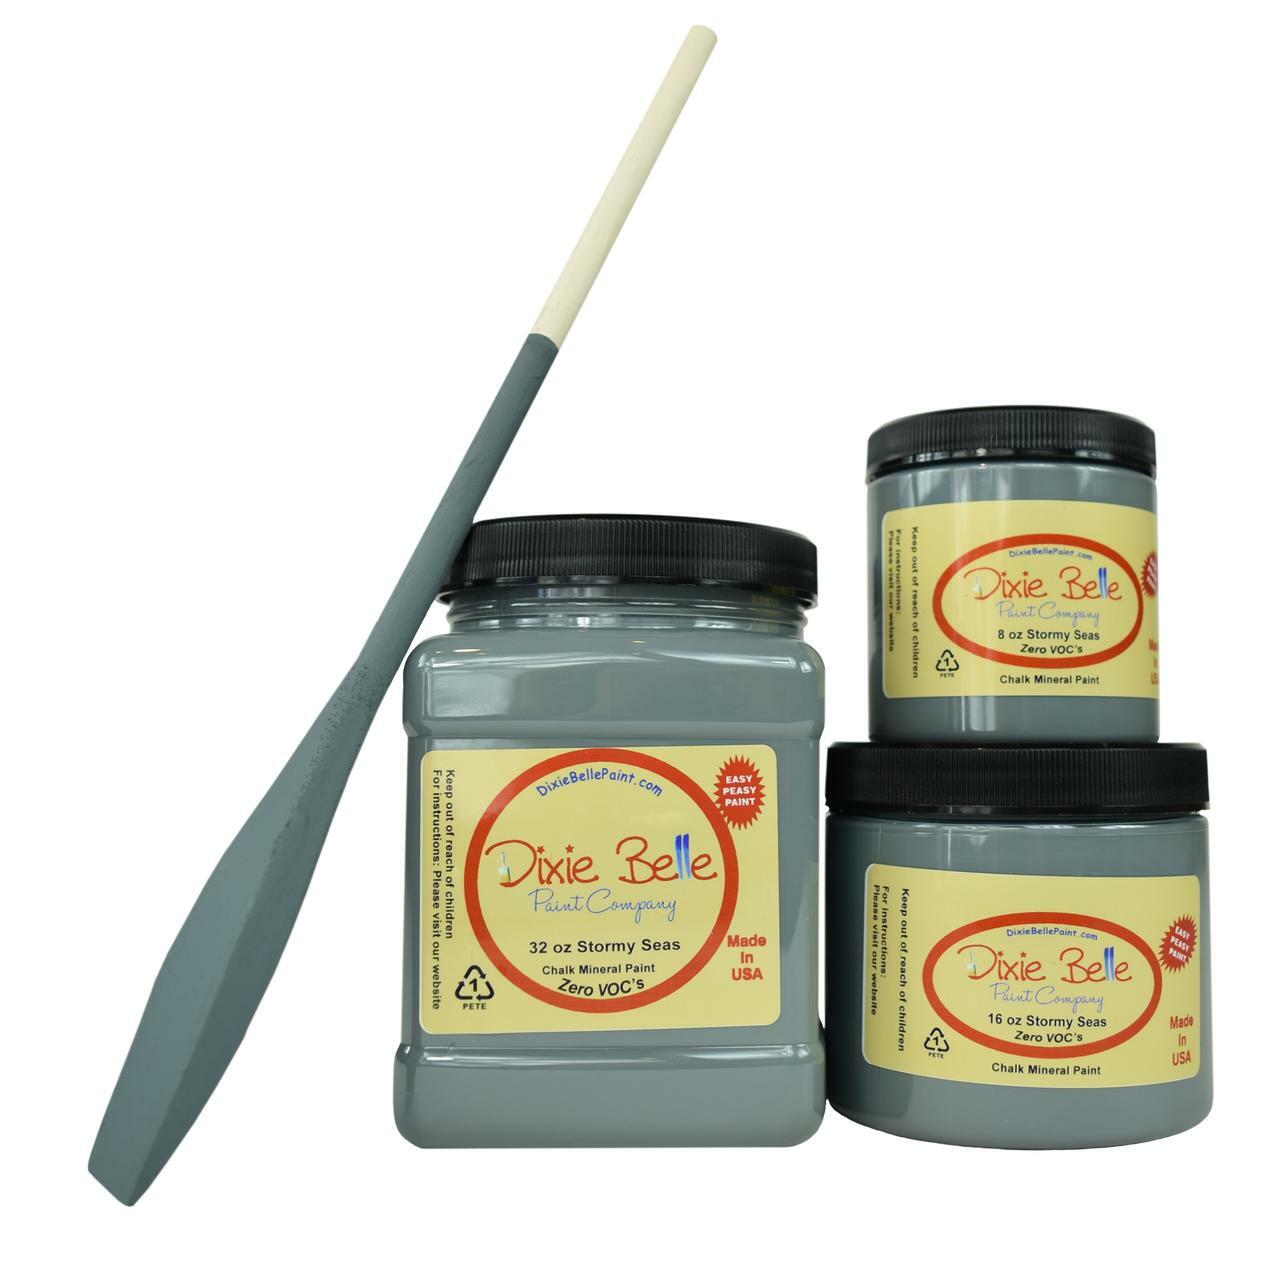 Stormy Seas Dixie Belle Chalk Mineral Paint - Same Day Shipping - No VOC - Chalk Paint for Furniture and Cabinets - Water Based Paint - belleandbeau850